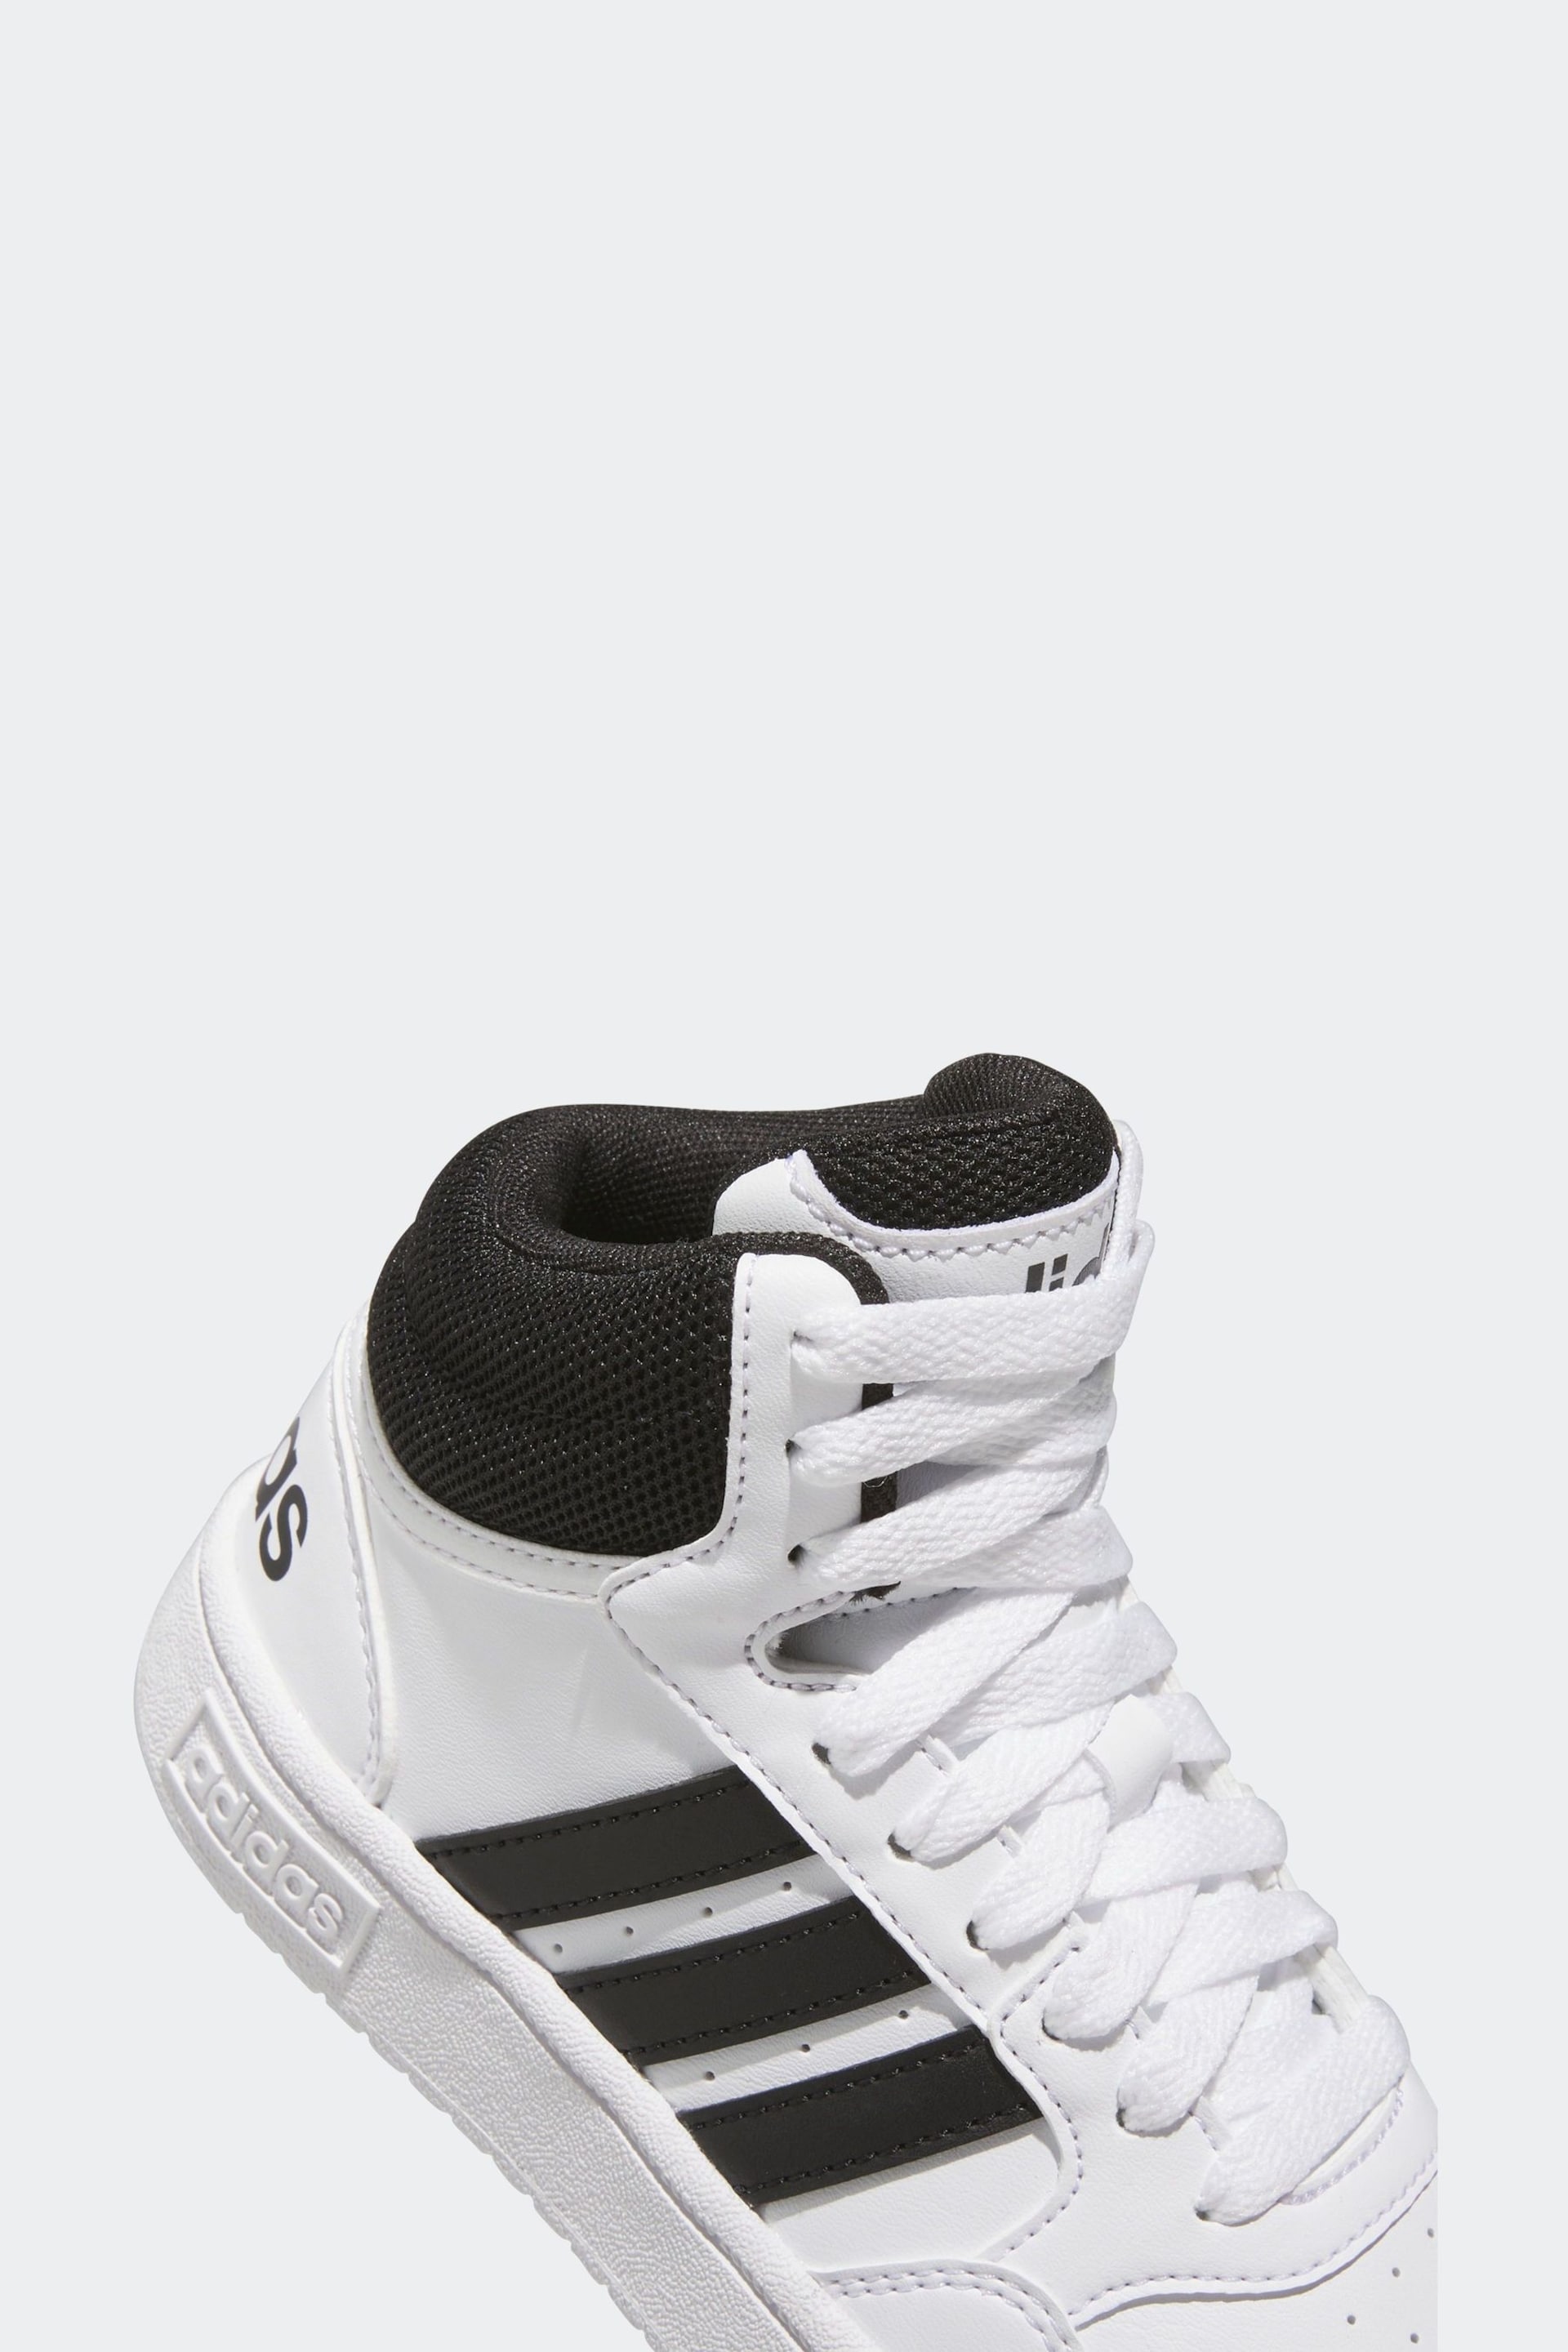 adidas White/black Hoops Mid Shoes - Image 8 of 8